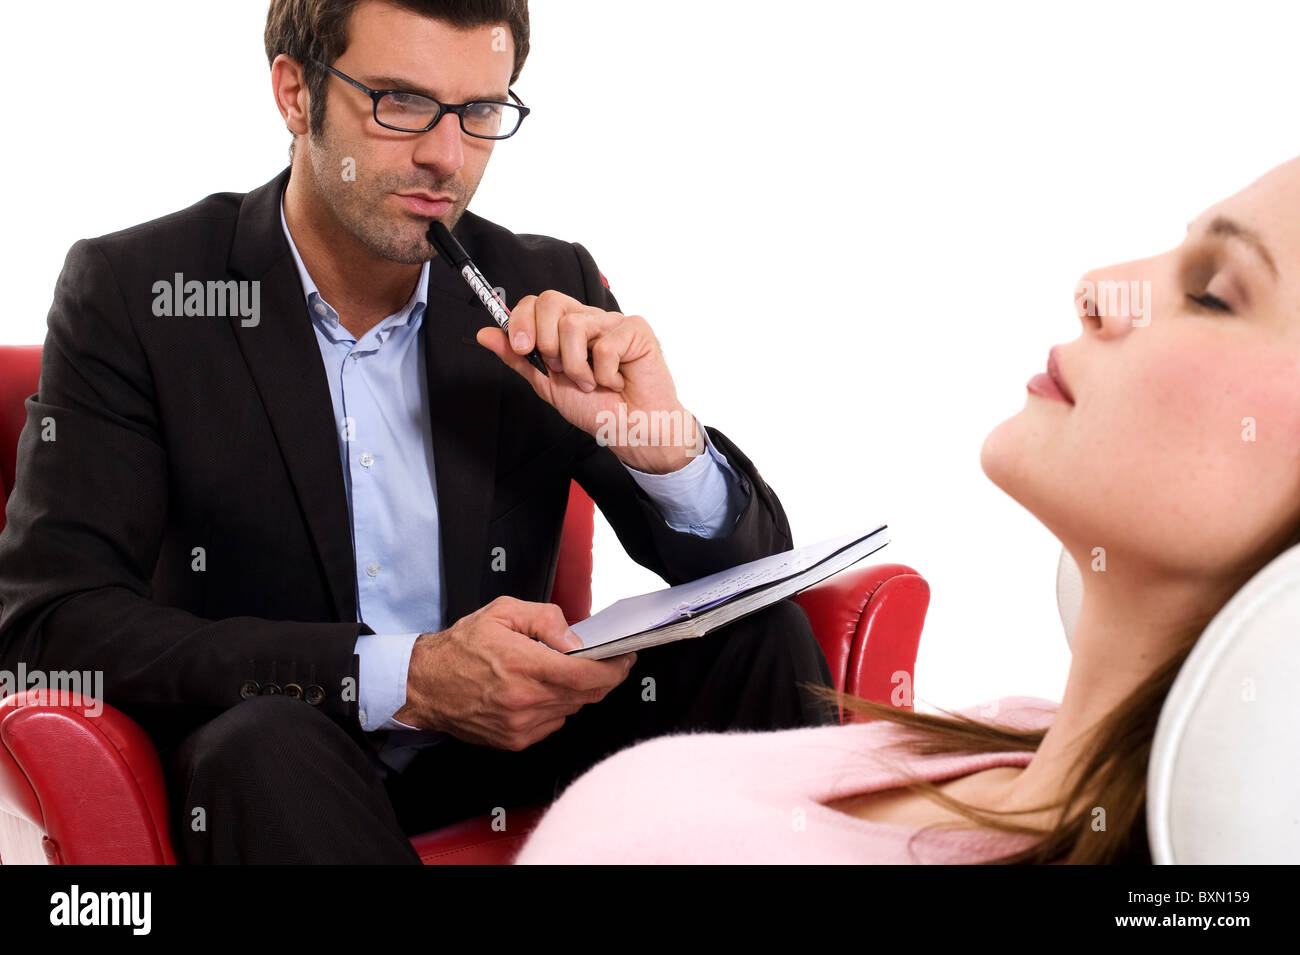 woman by the psychologist Stock Photo